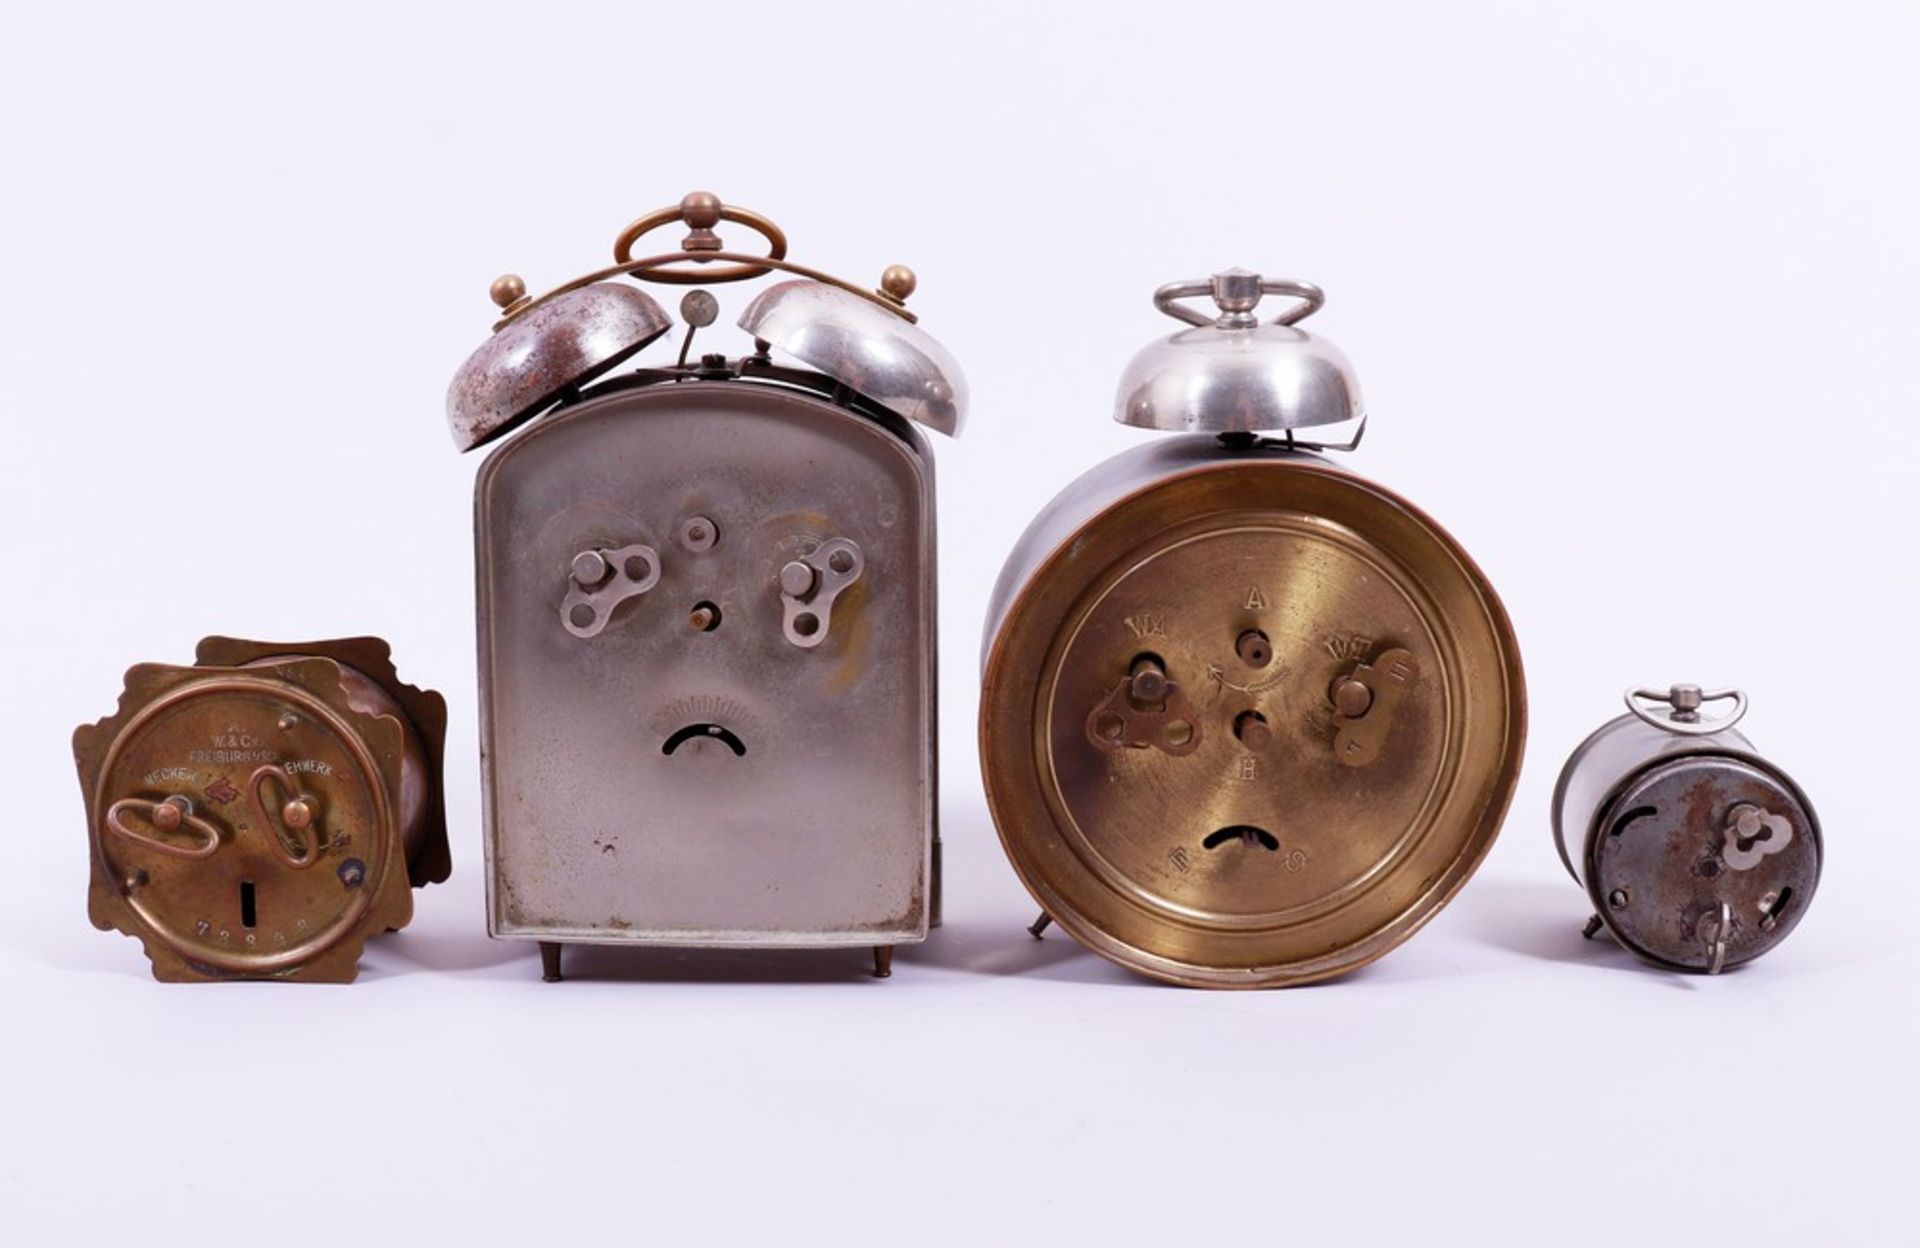 4 table alarm clocks, Gustav Becker/Junghans and others, c. 1900/20 - Image 2 of 4